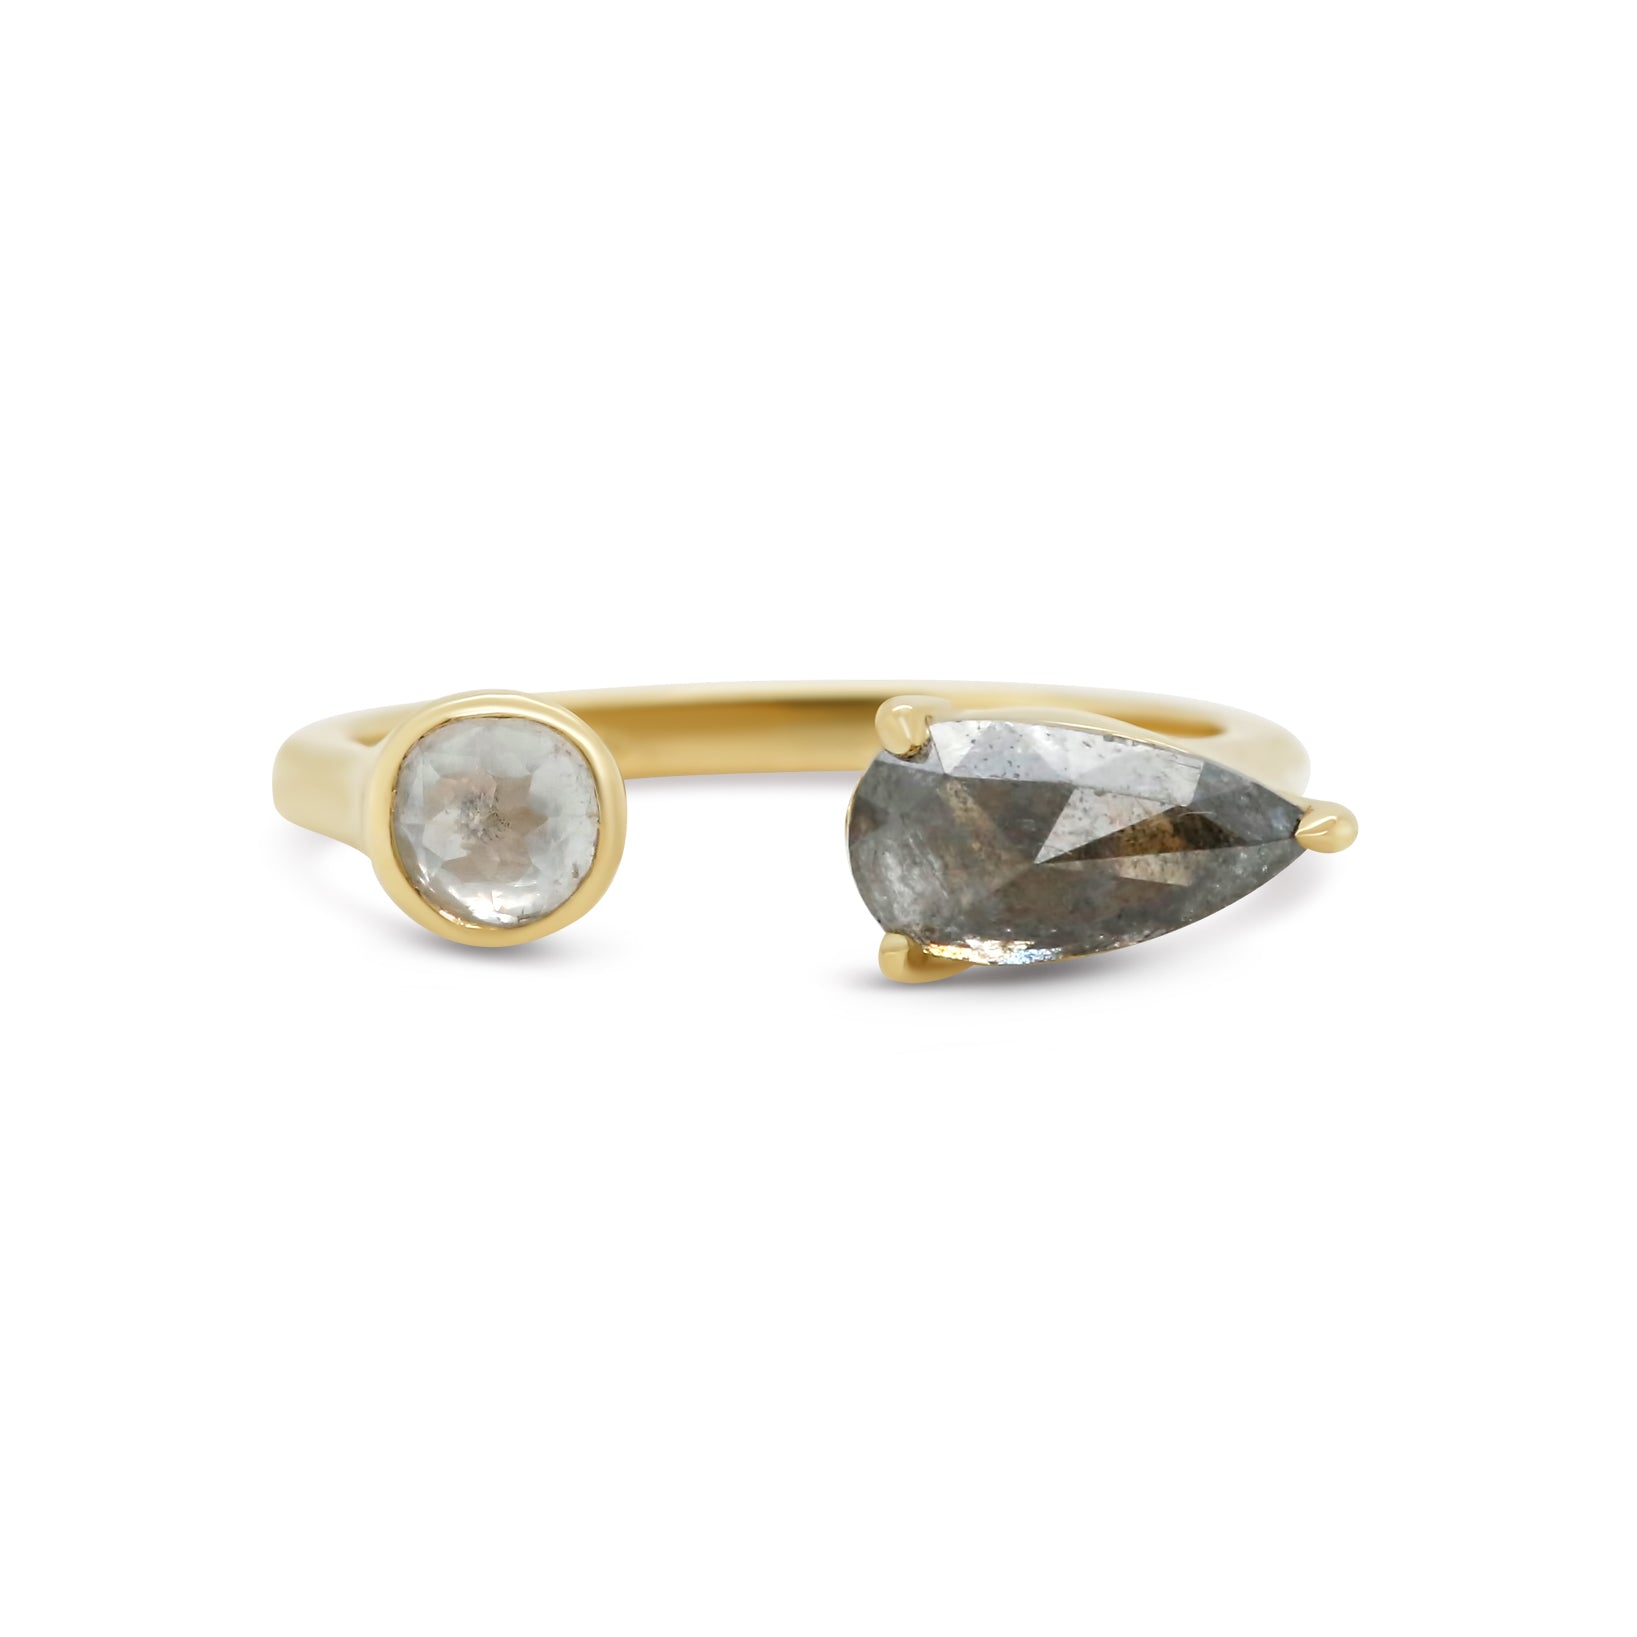 14k yellow gold open band two stone round bezel and pear shape rose cut gray diamond ring